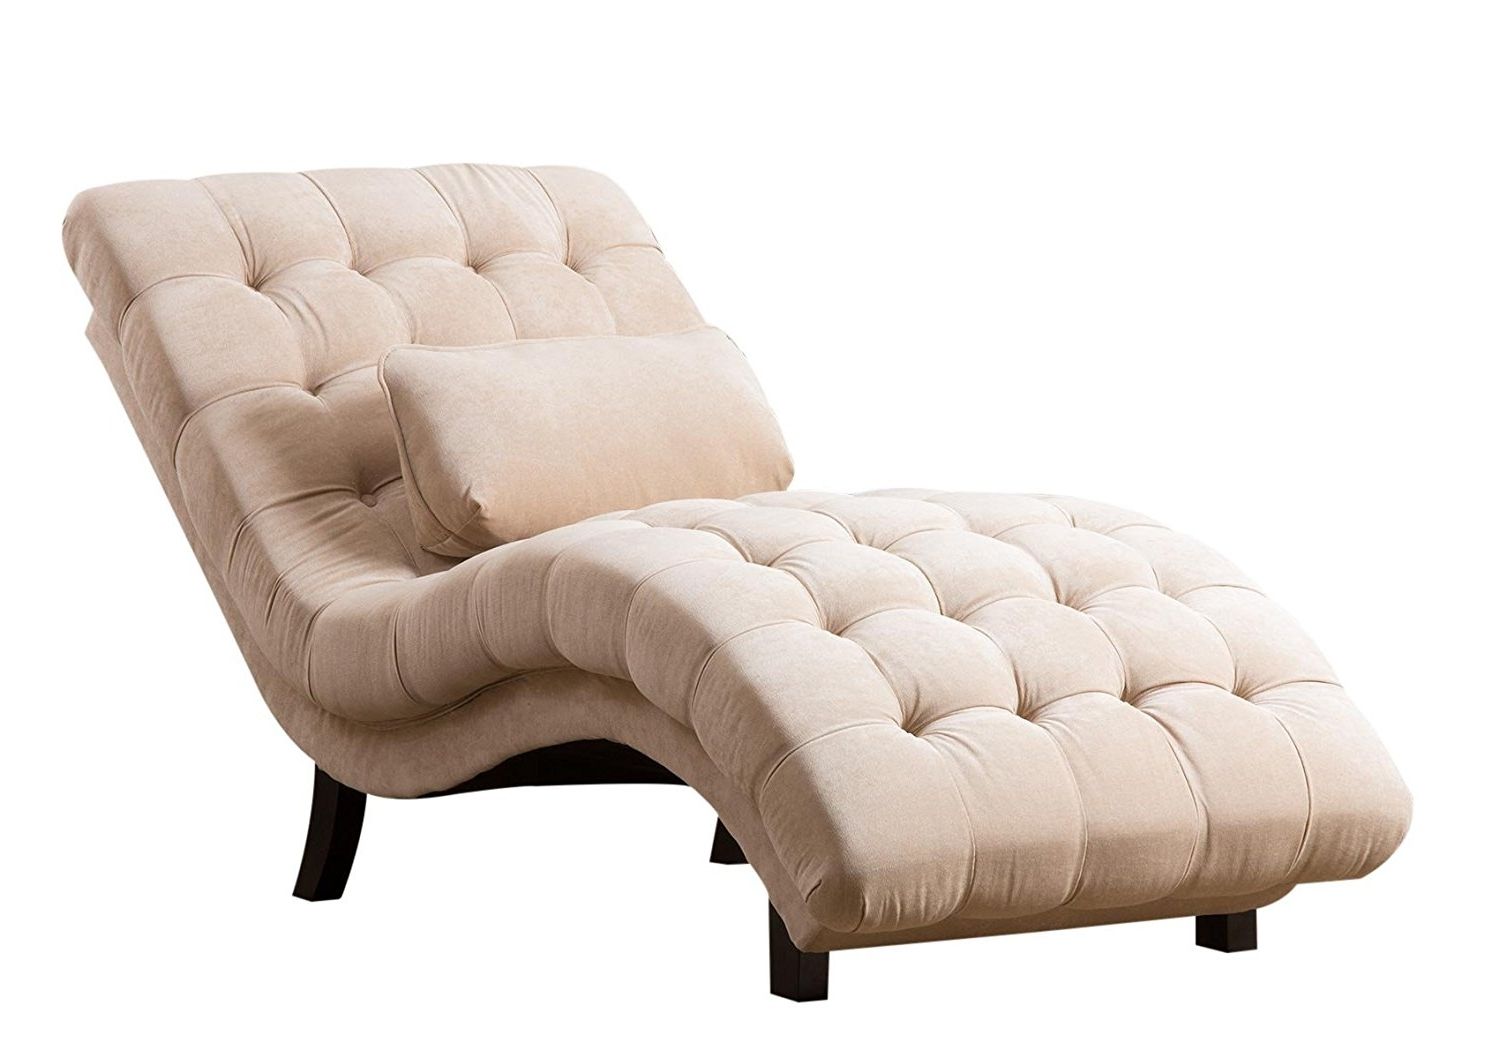 Upholstered Chaise Lounges For Well Known Amazon: Abbyson Carmen Cream Fabric Chaise: Home & Kitchen (Photo 6 of 15)